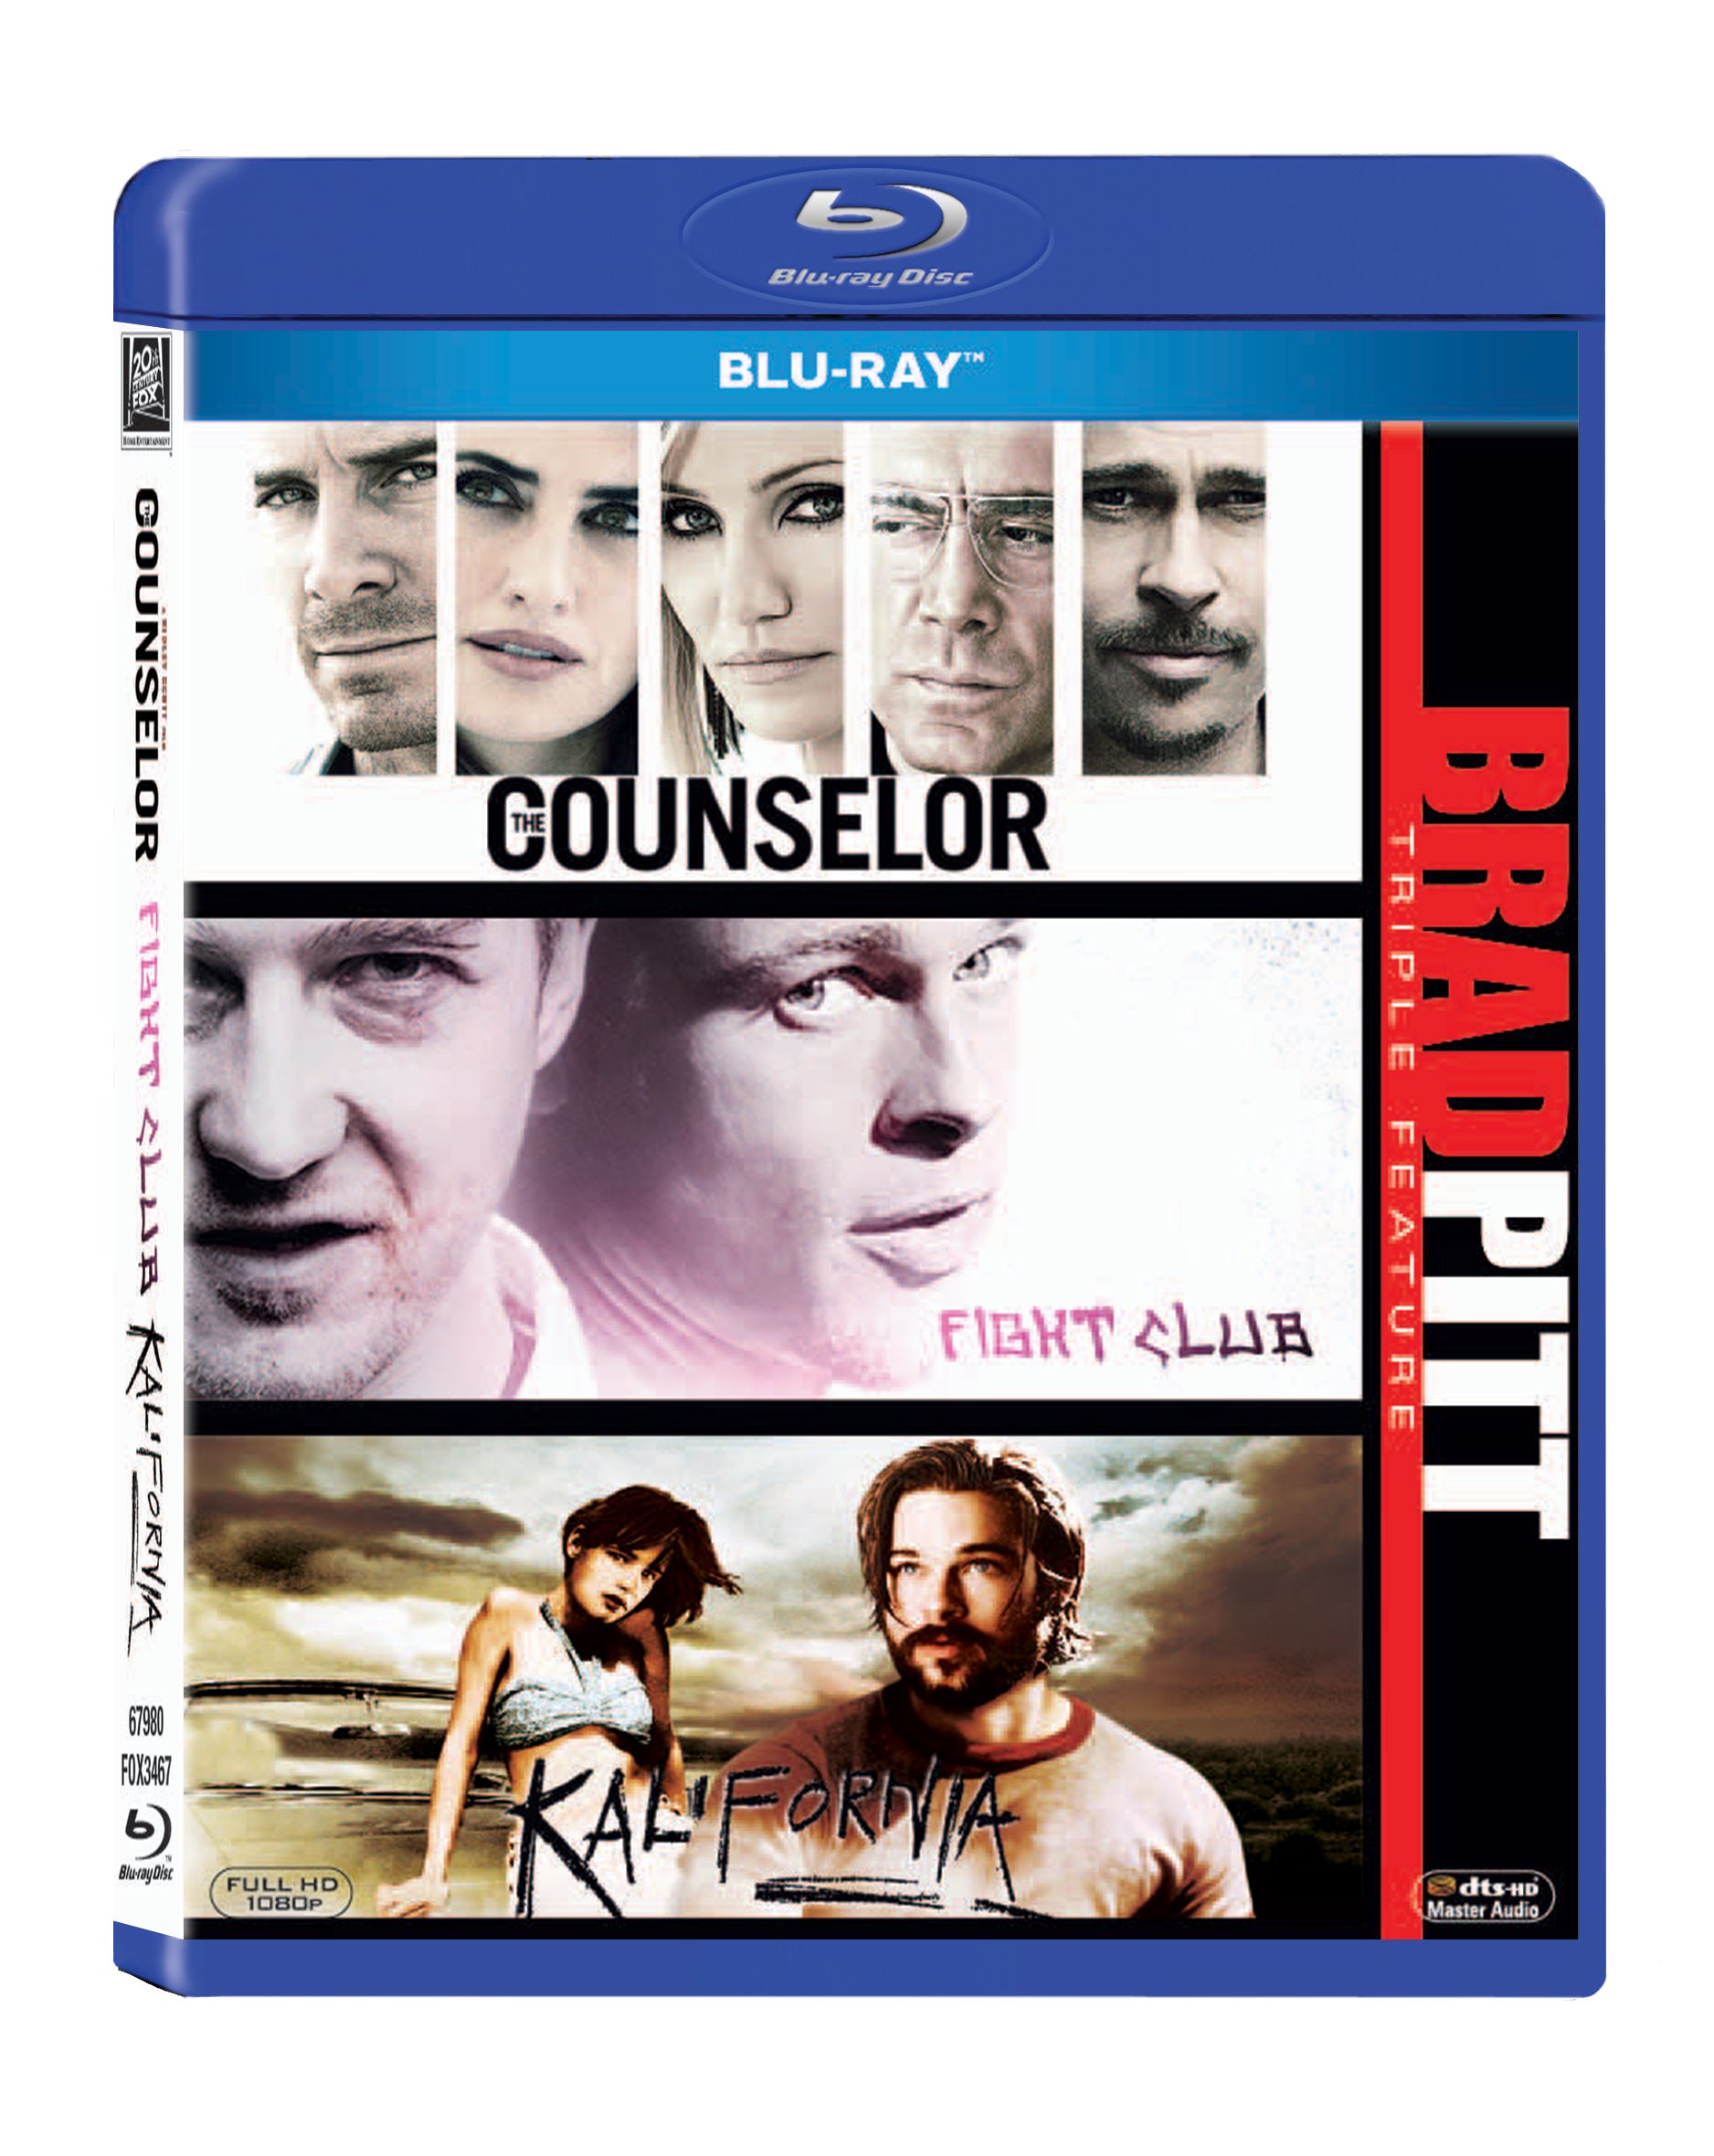 brad-pitt-3-movies-collection-the-counselor-fight-club-kalifornia